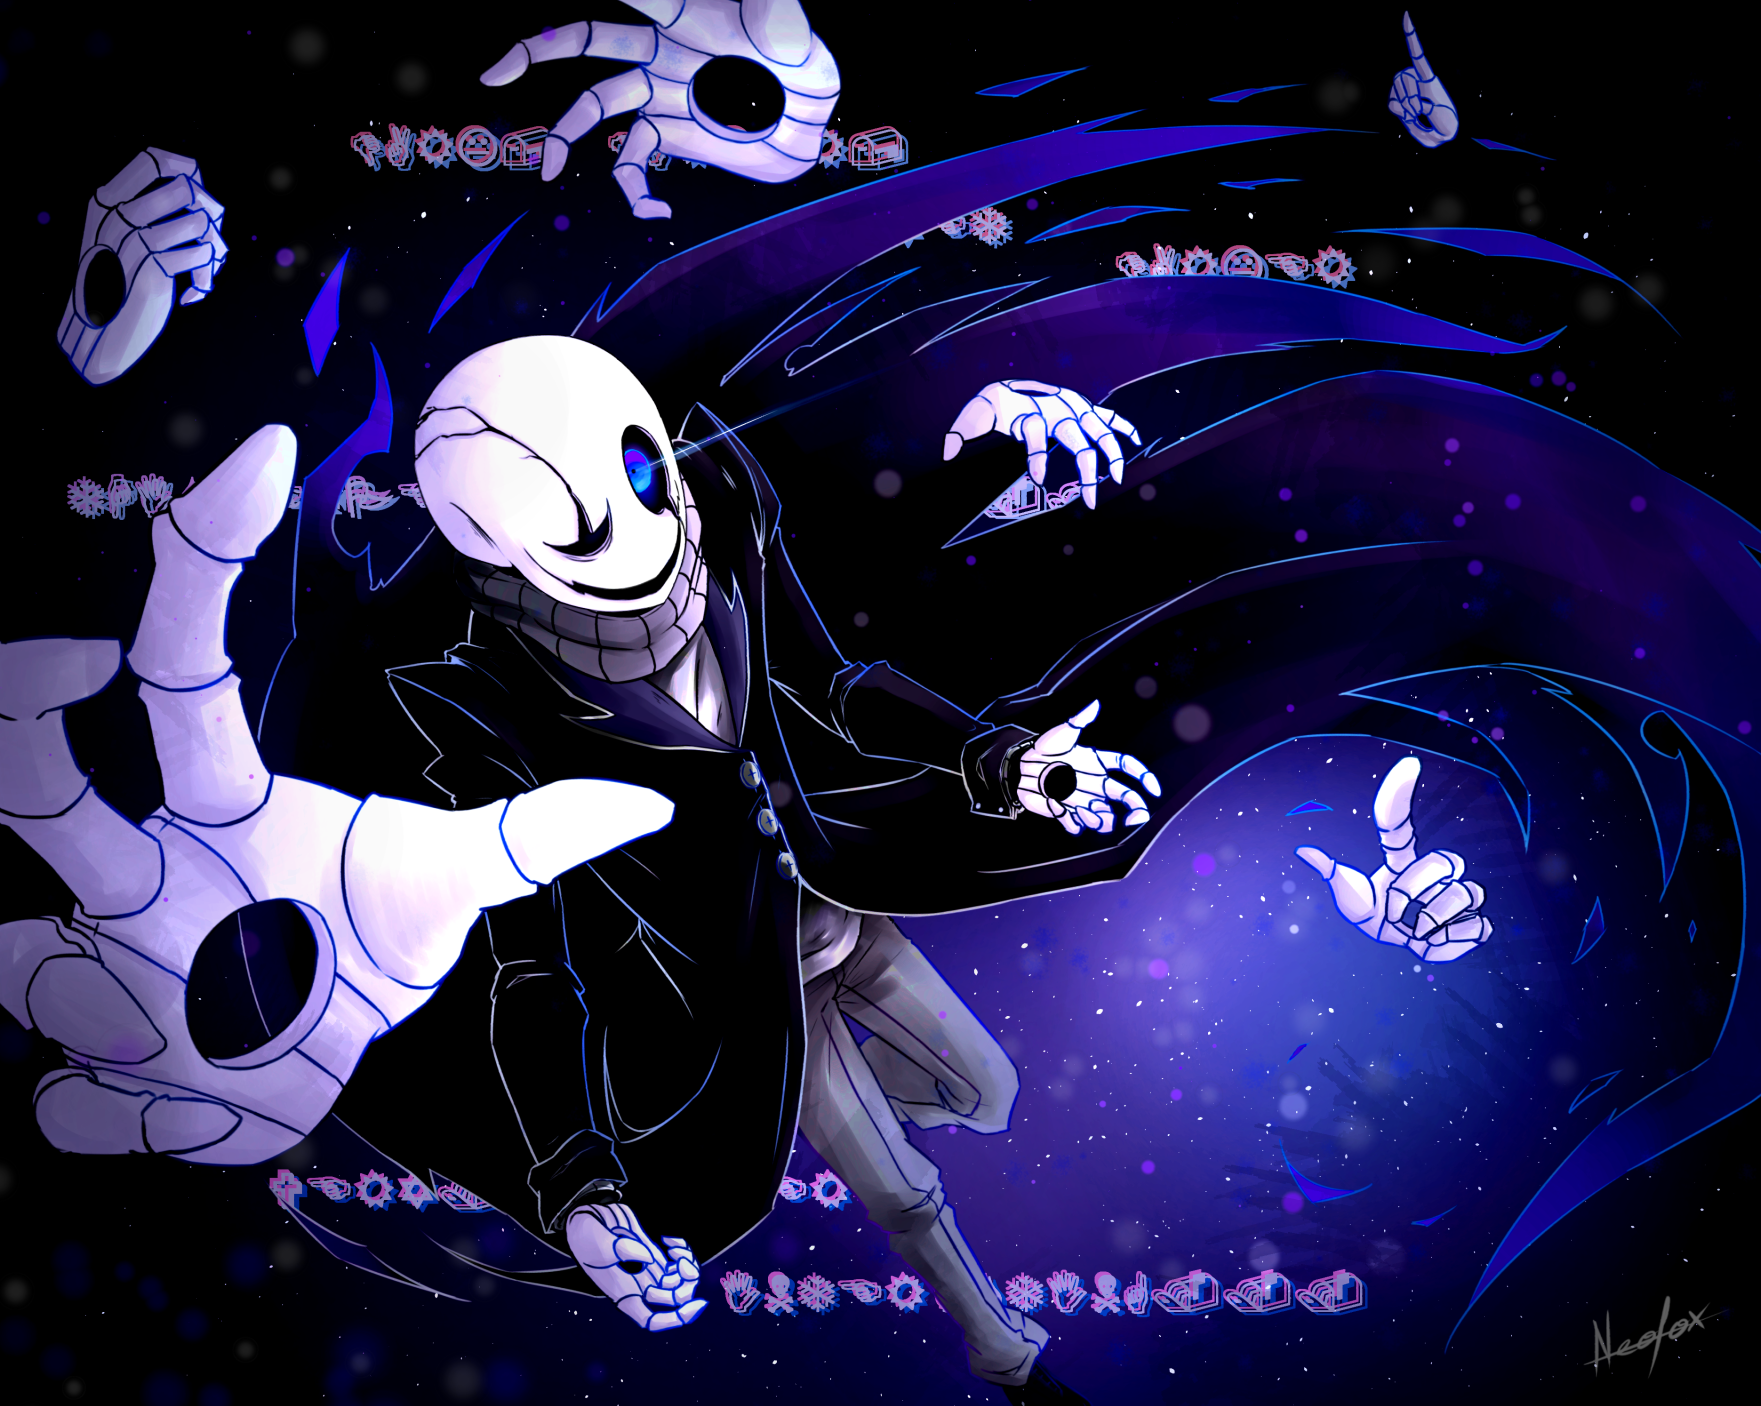 w_d_gaster_by_neofox67-dar9l6o.png